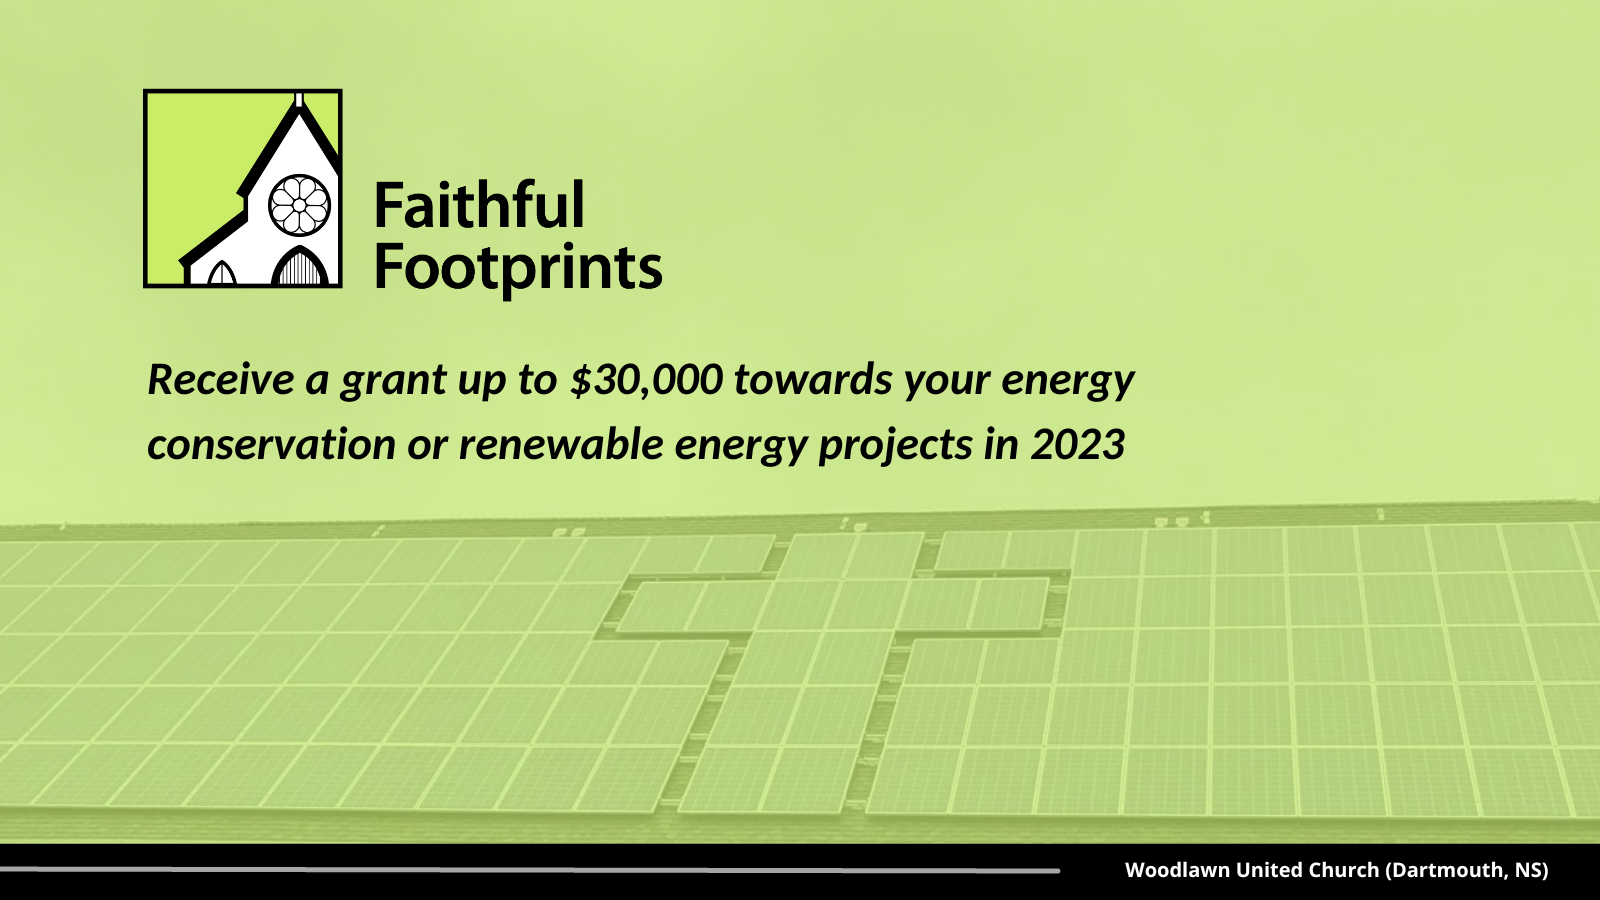 Faithful Footprints: Receive a grant up to $30,000 towards your energy conservation or renewable energy projects in 2023